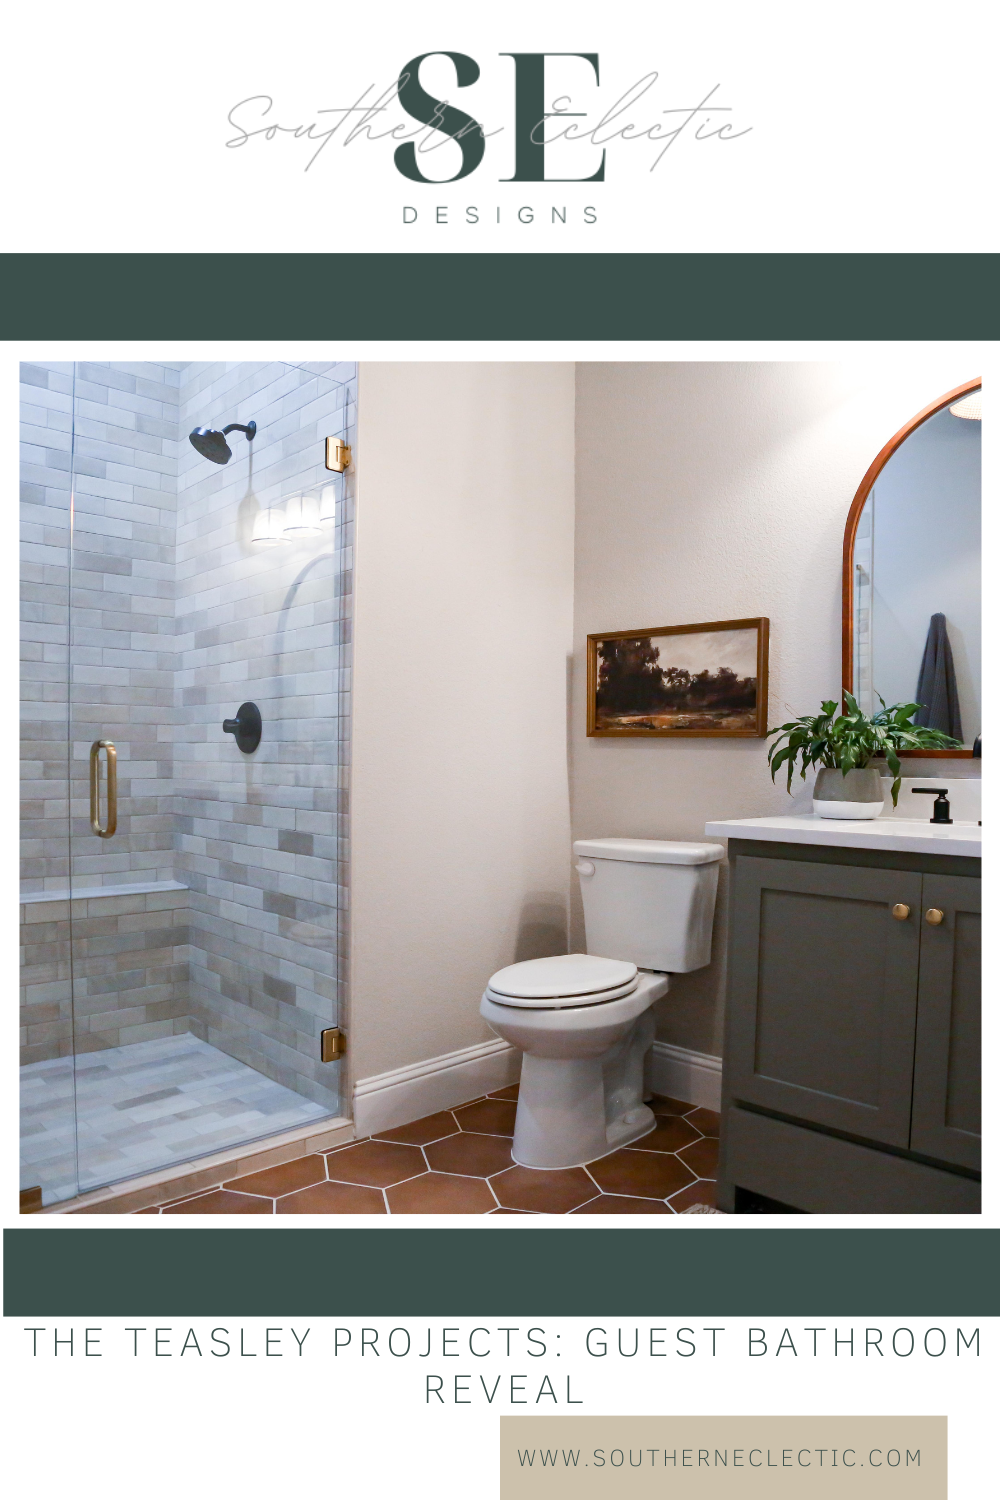 The Teasley Projects: Guest Bathroom Reveal